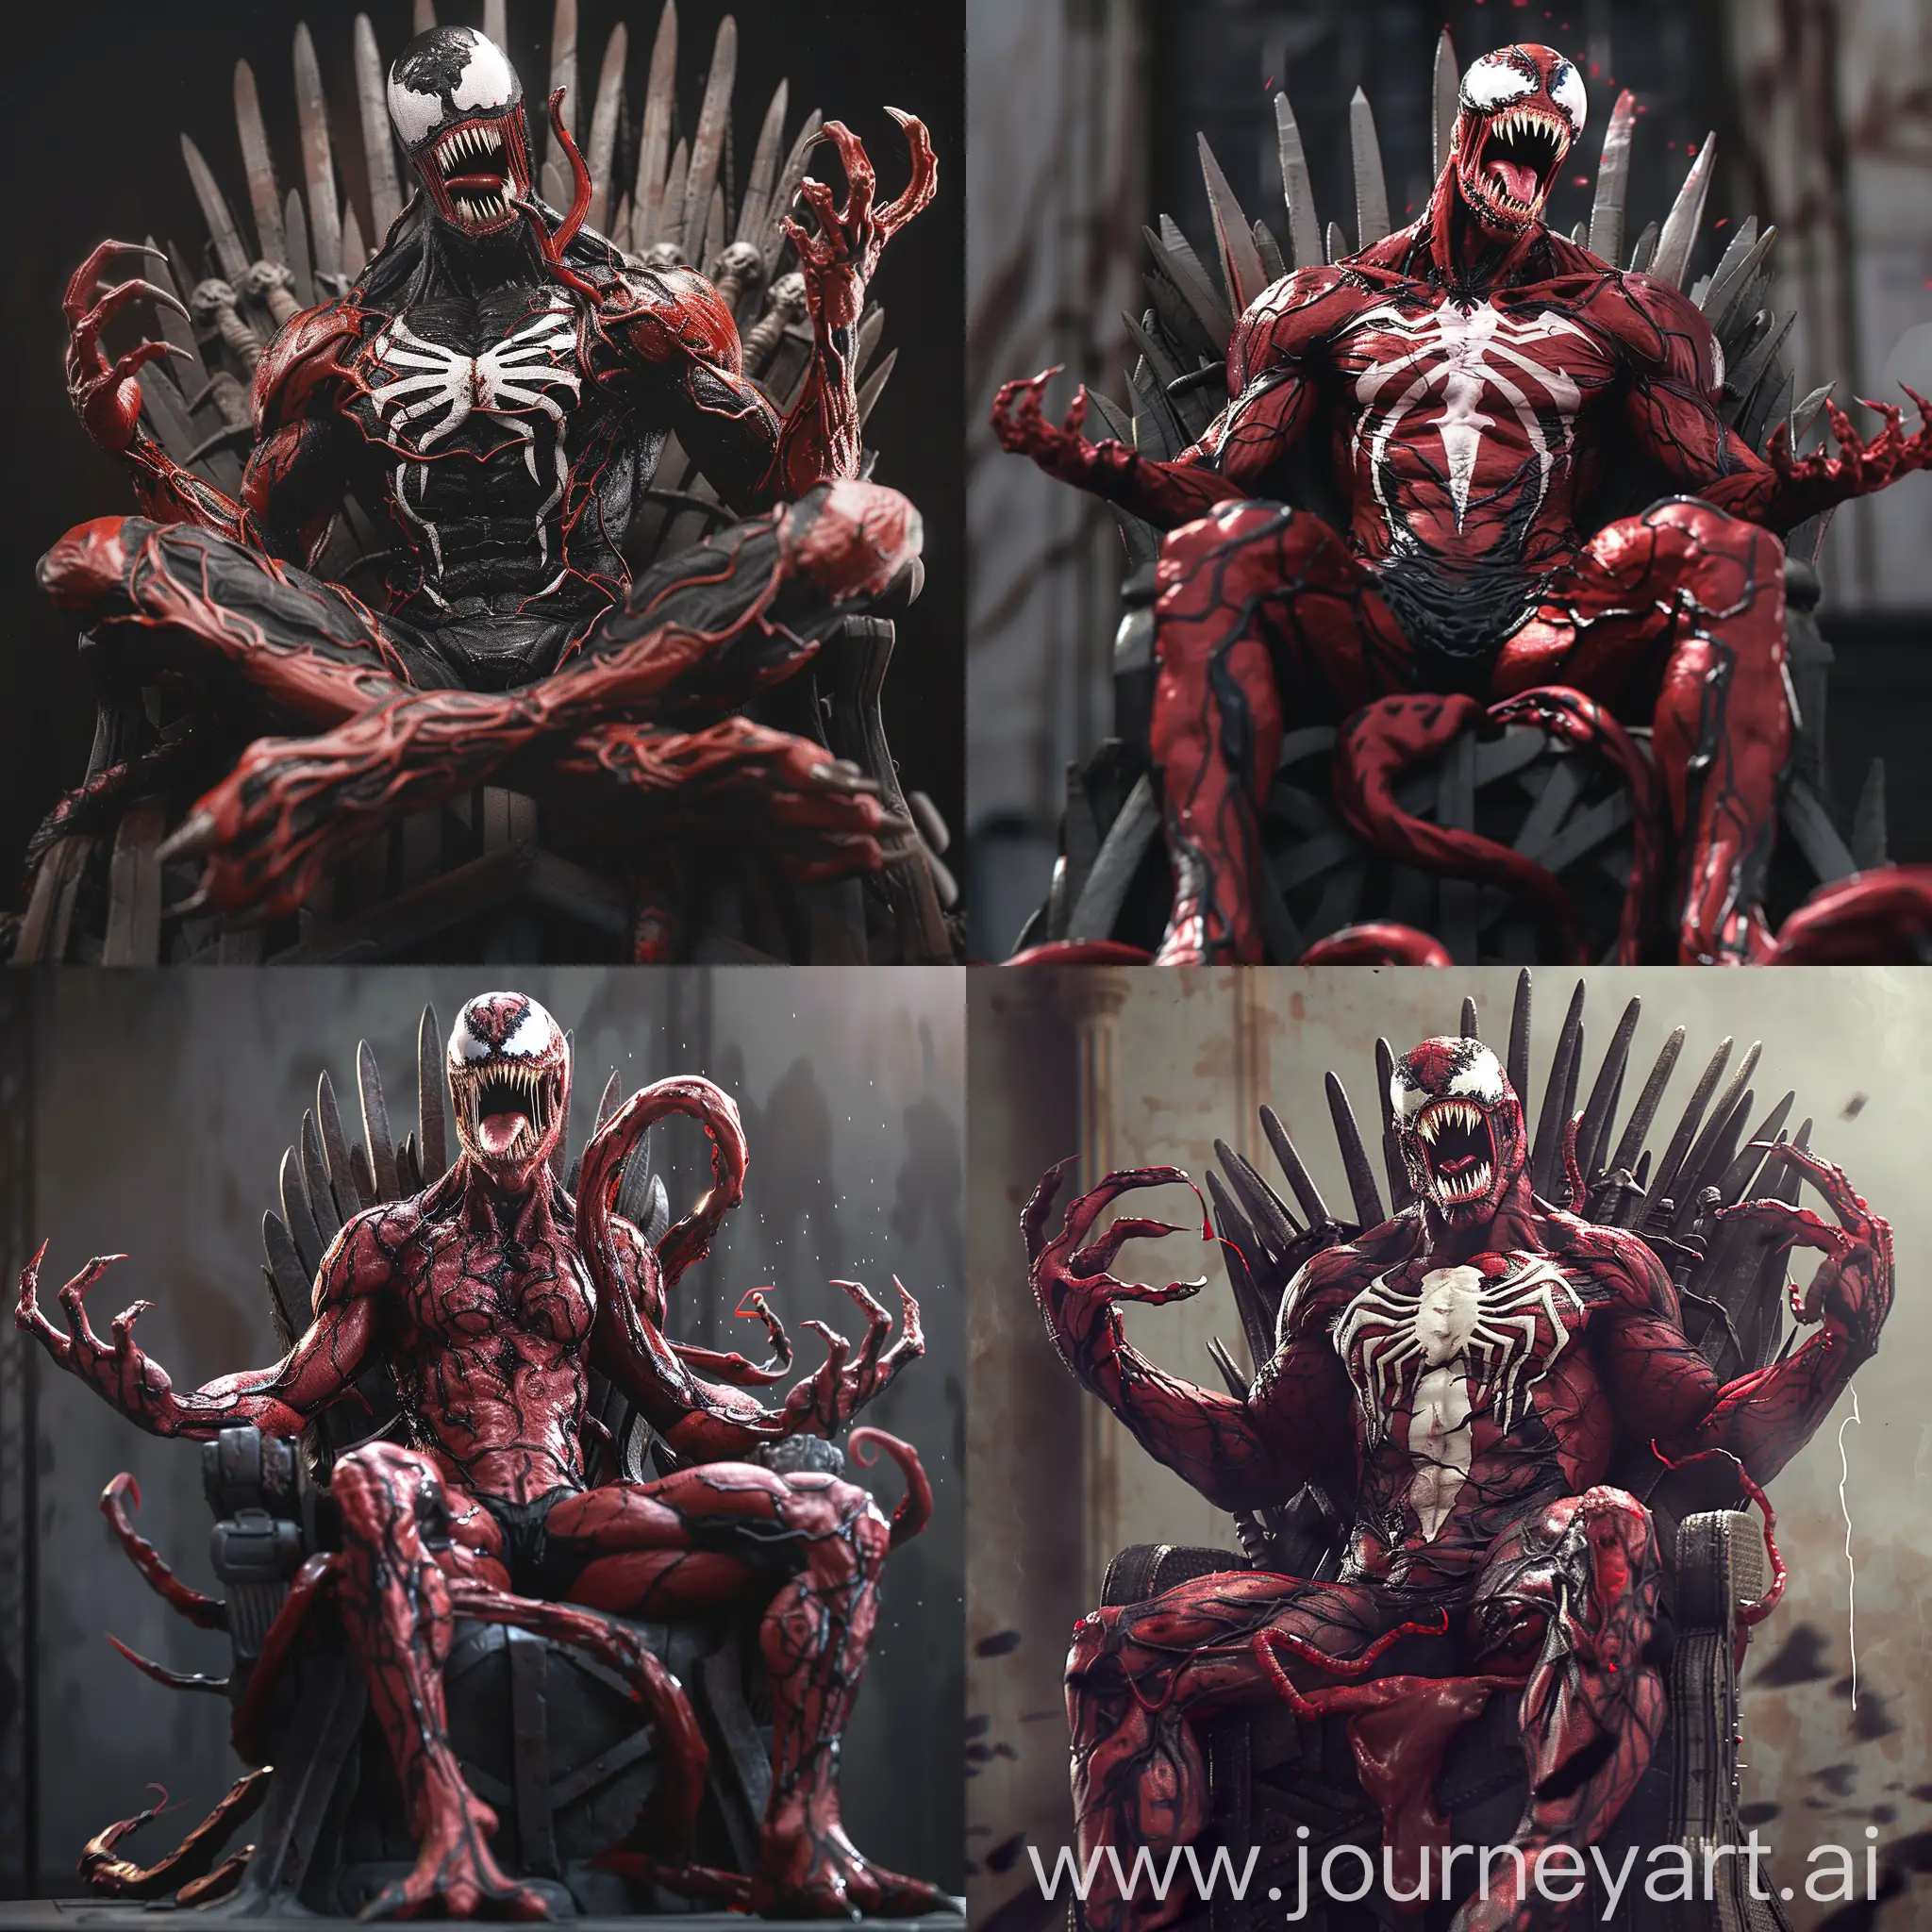 Full height, Carnage from Marvel sits on a throne, open mouth, sharp fangs, carnage symbiote, one hand in the form of a red blade, full-length pose, realistic, over-detailed, cinematic, 8k, hd